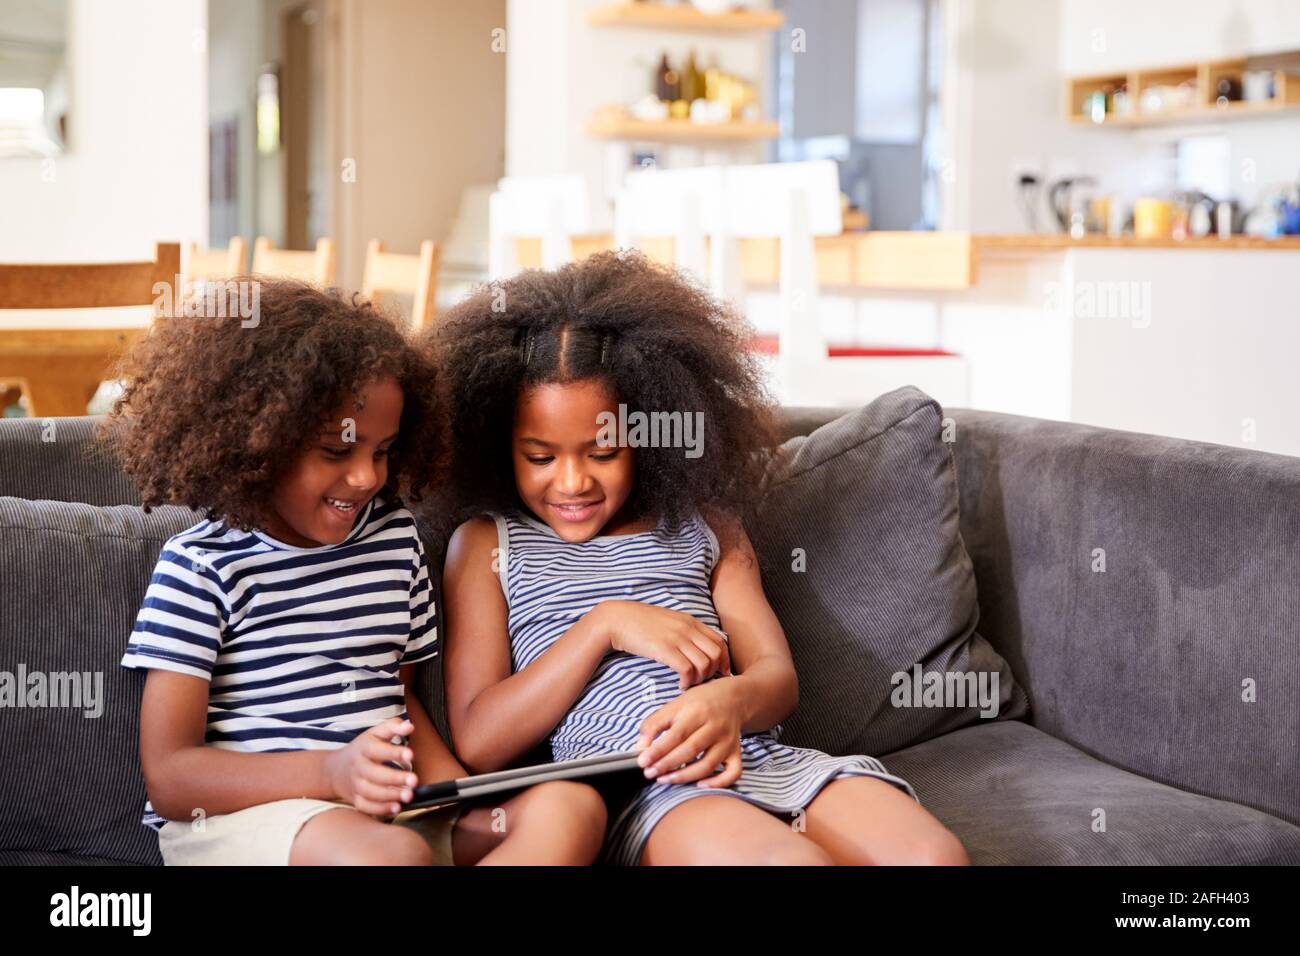 Brother And Sister Sitting On Sofa At Home Playing With Digital Tablet Stock Photo